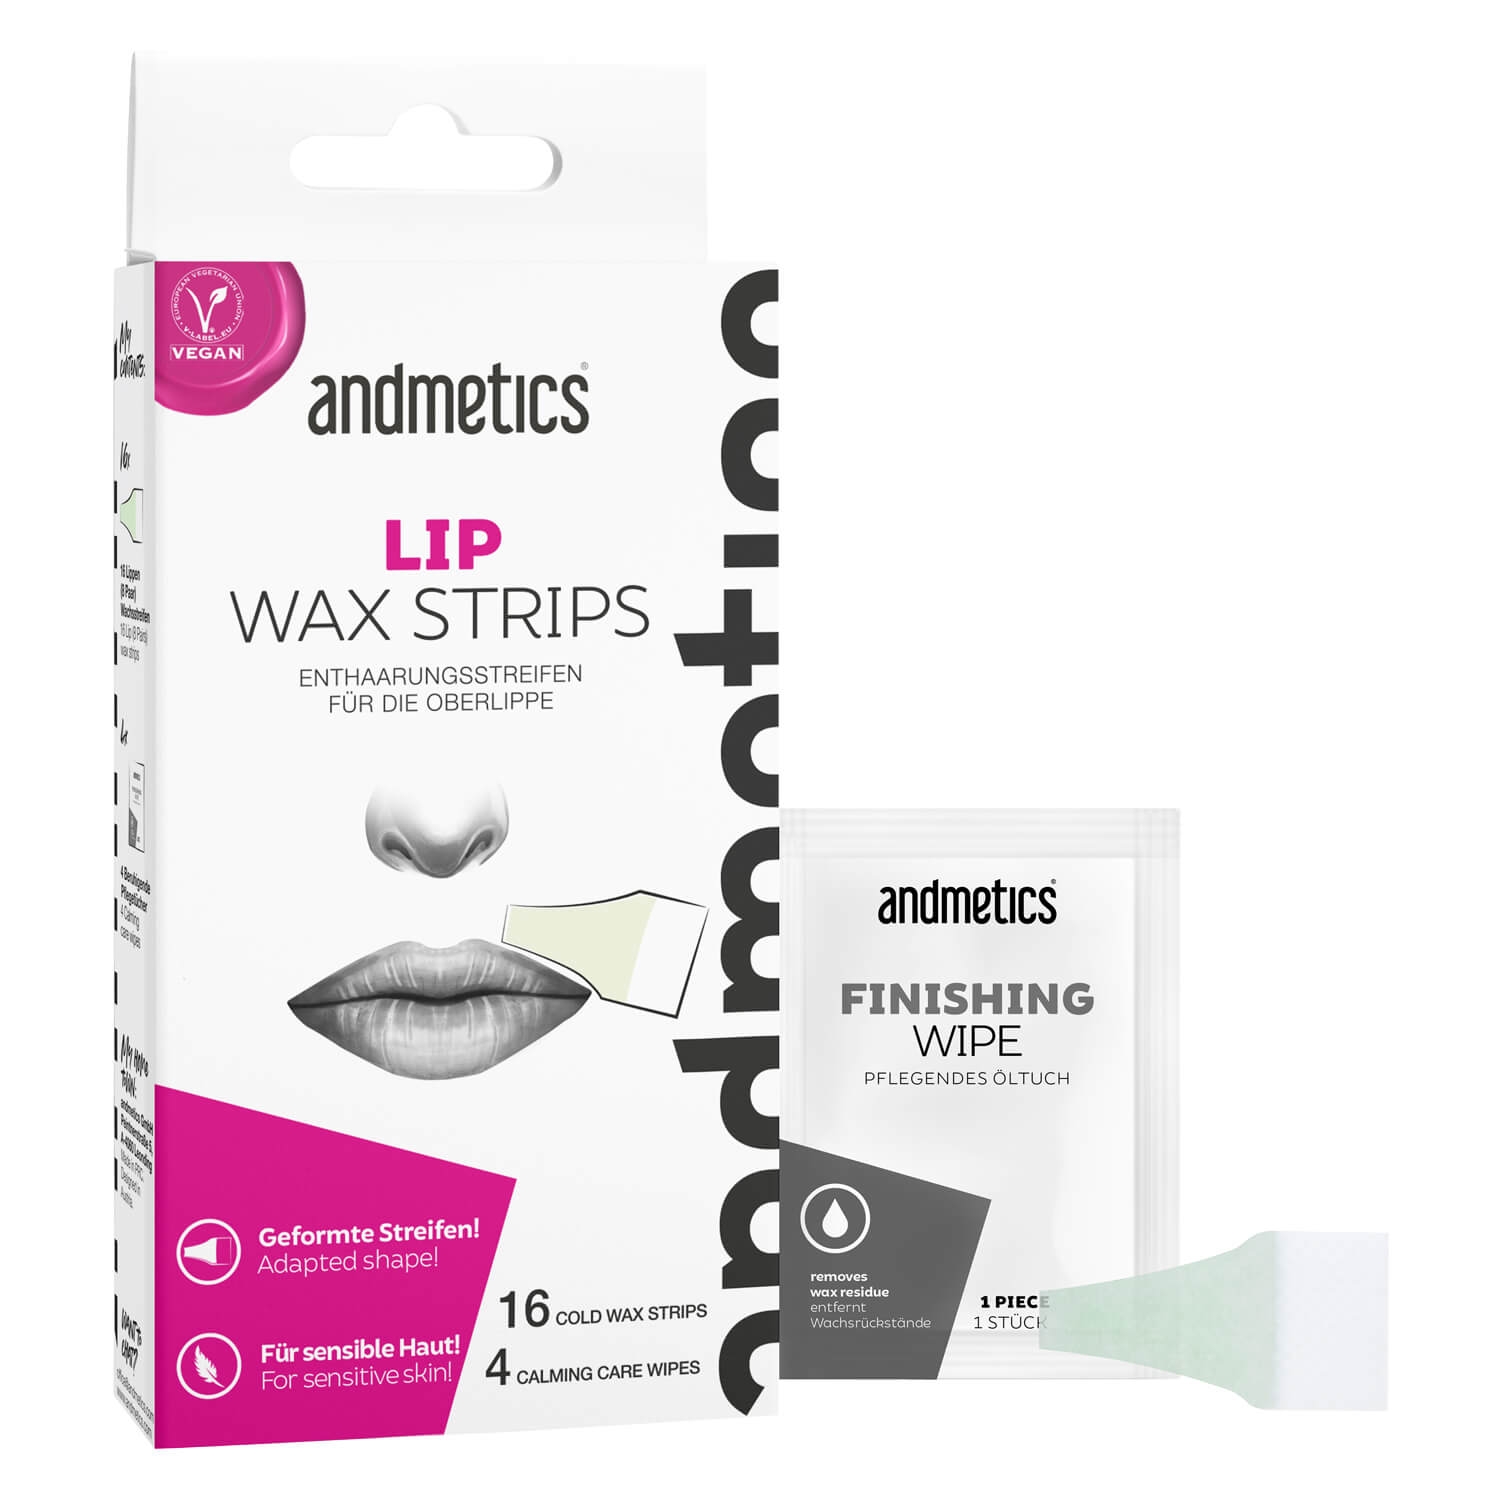 Product image from andmetics - Lip Wax Strips